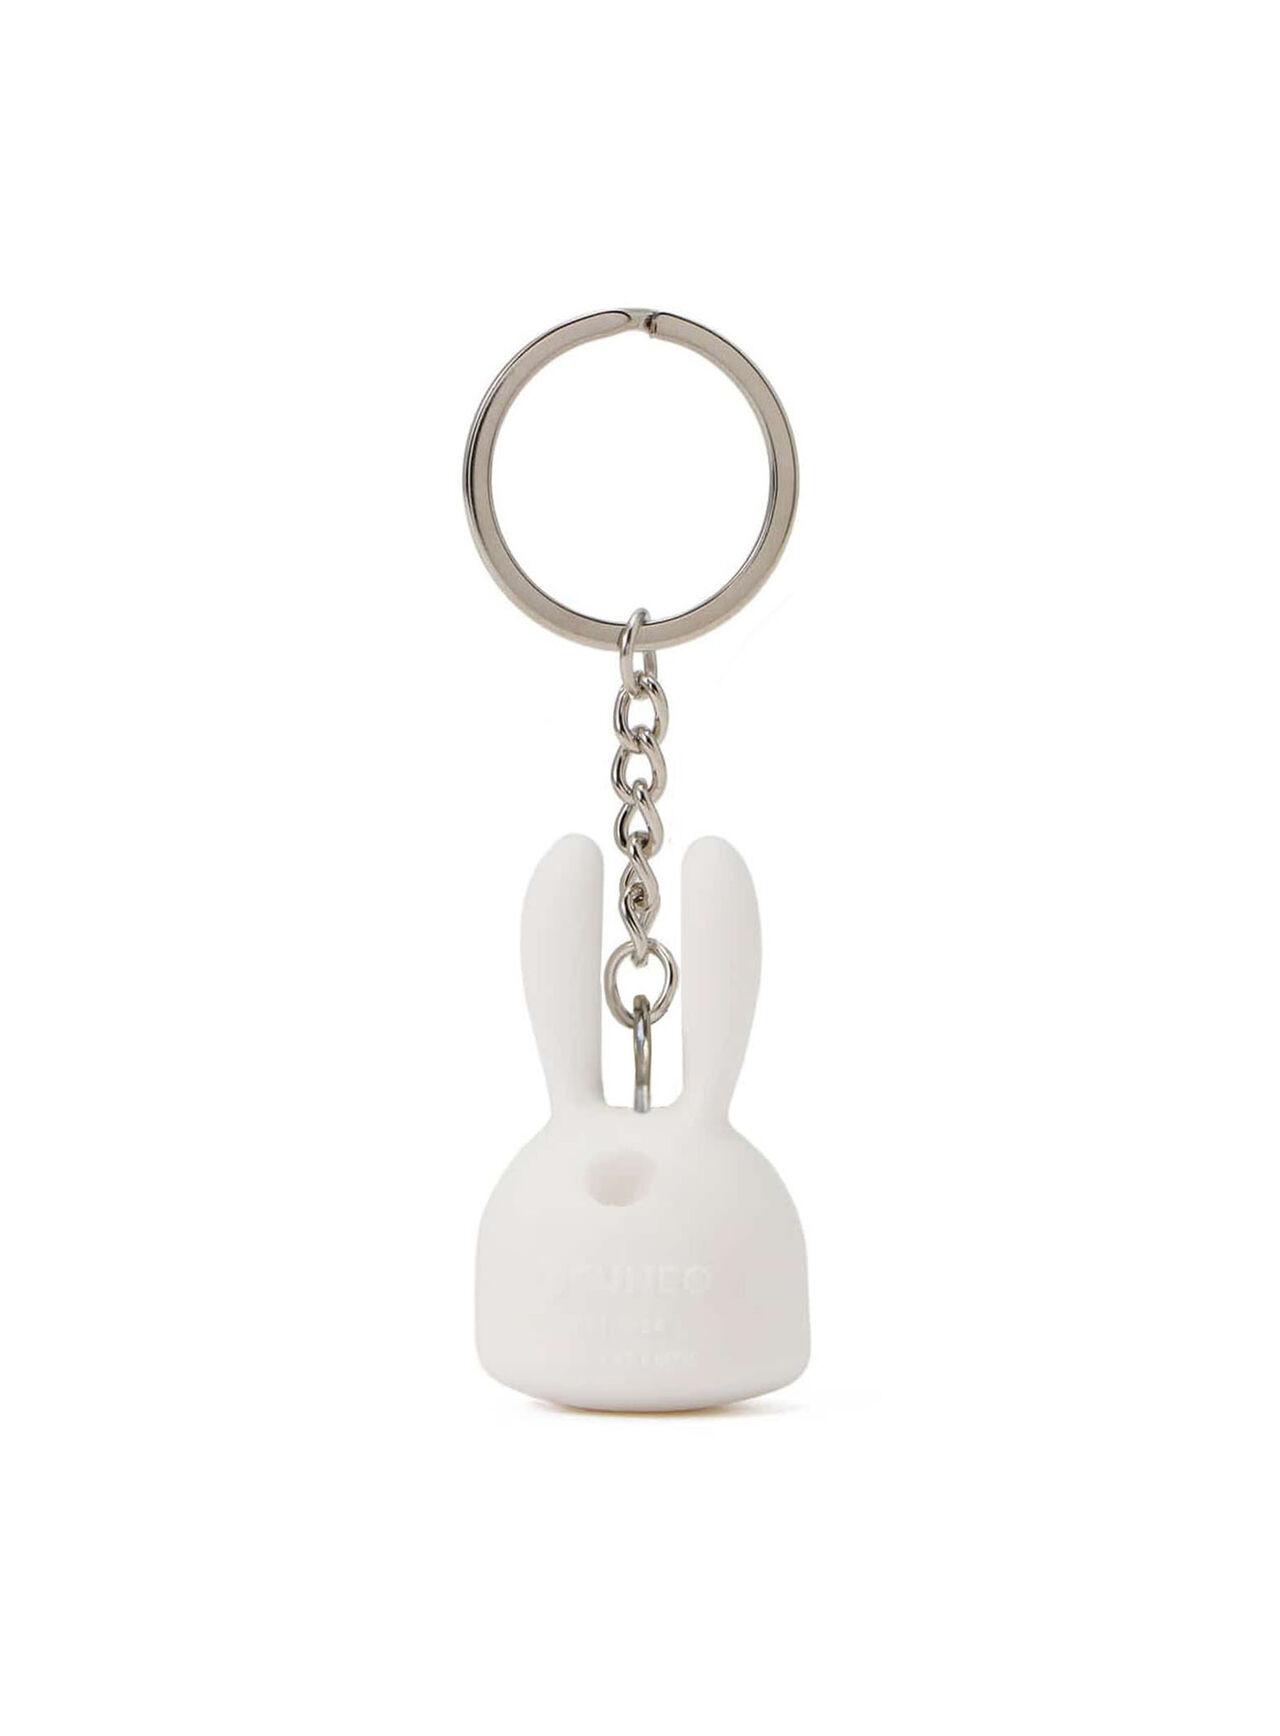 3D Rabbit Rubber Key Chain,ONE, large image number 1